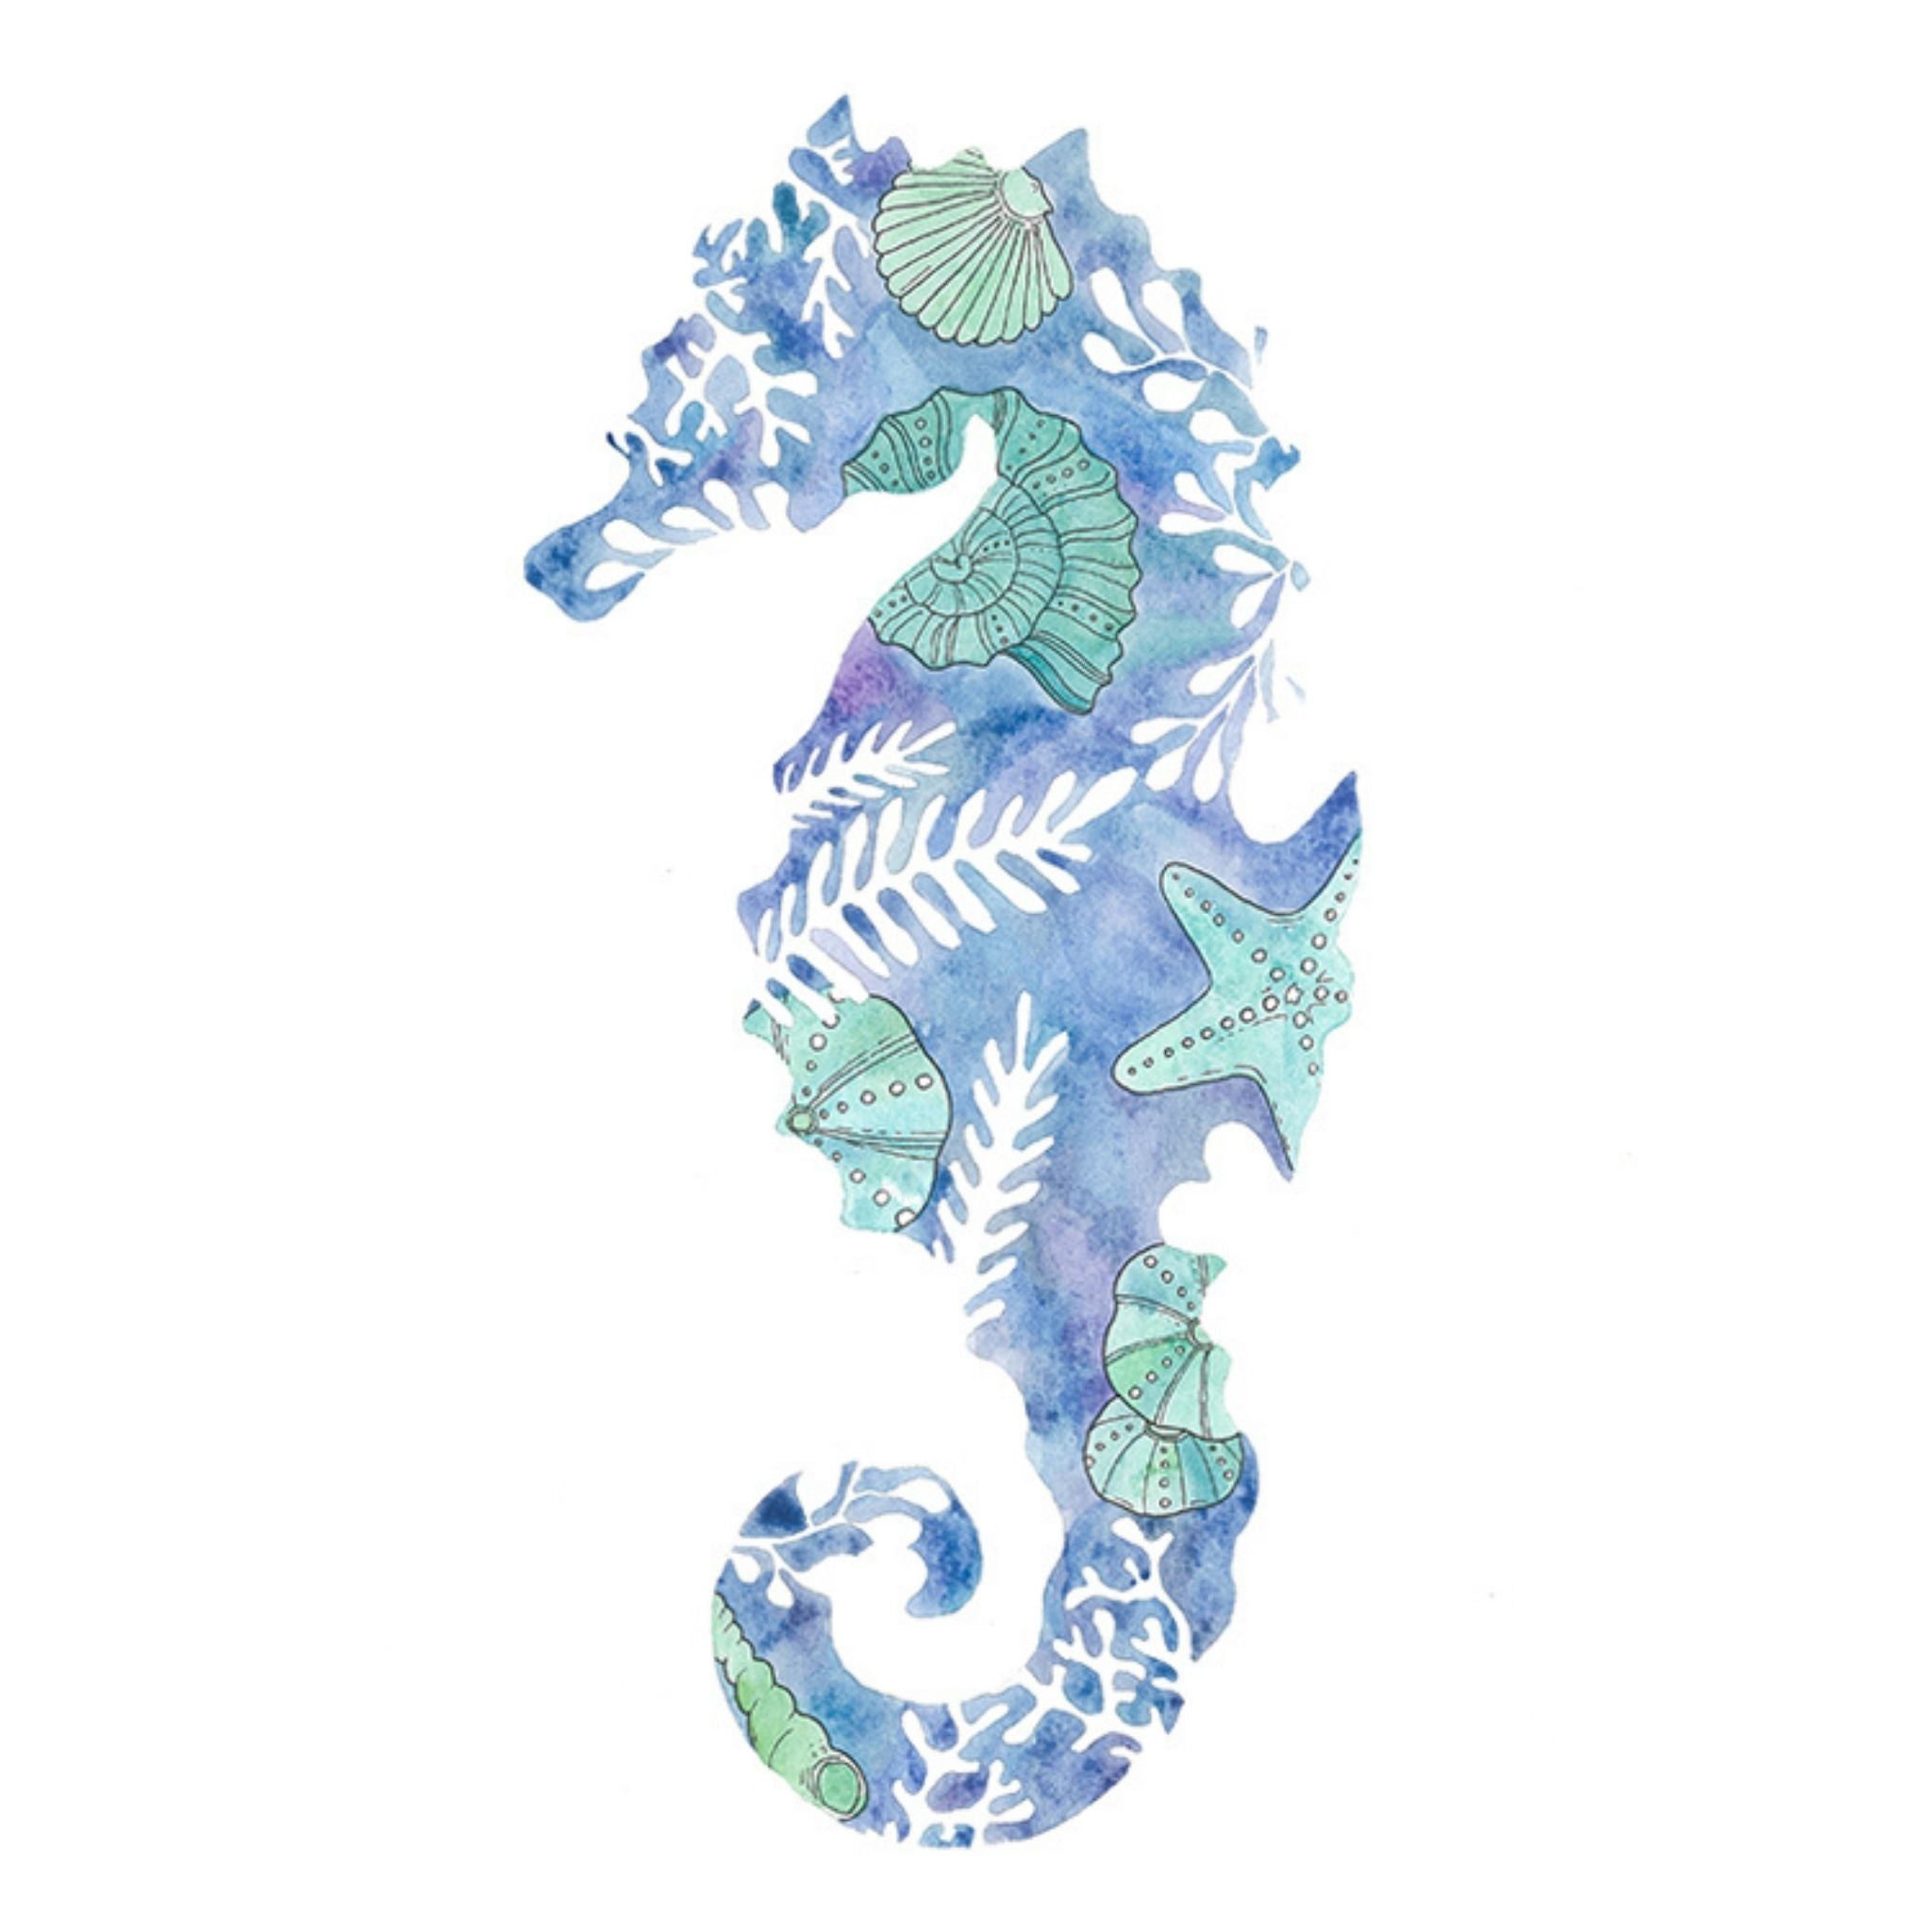 Fossil Seahorse (Size: A4)